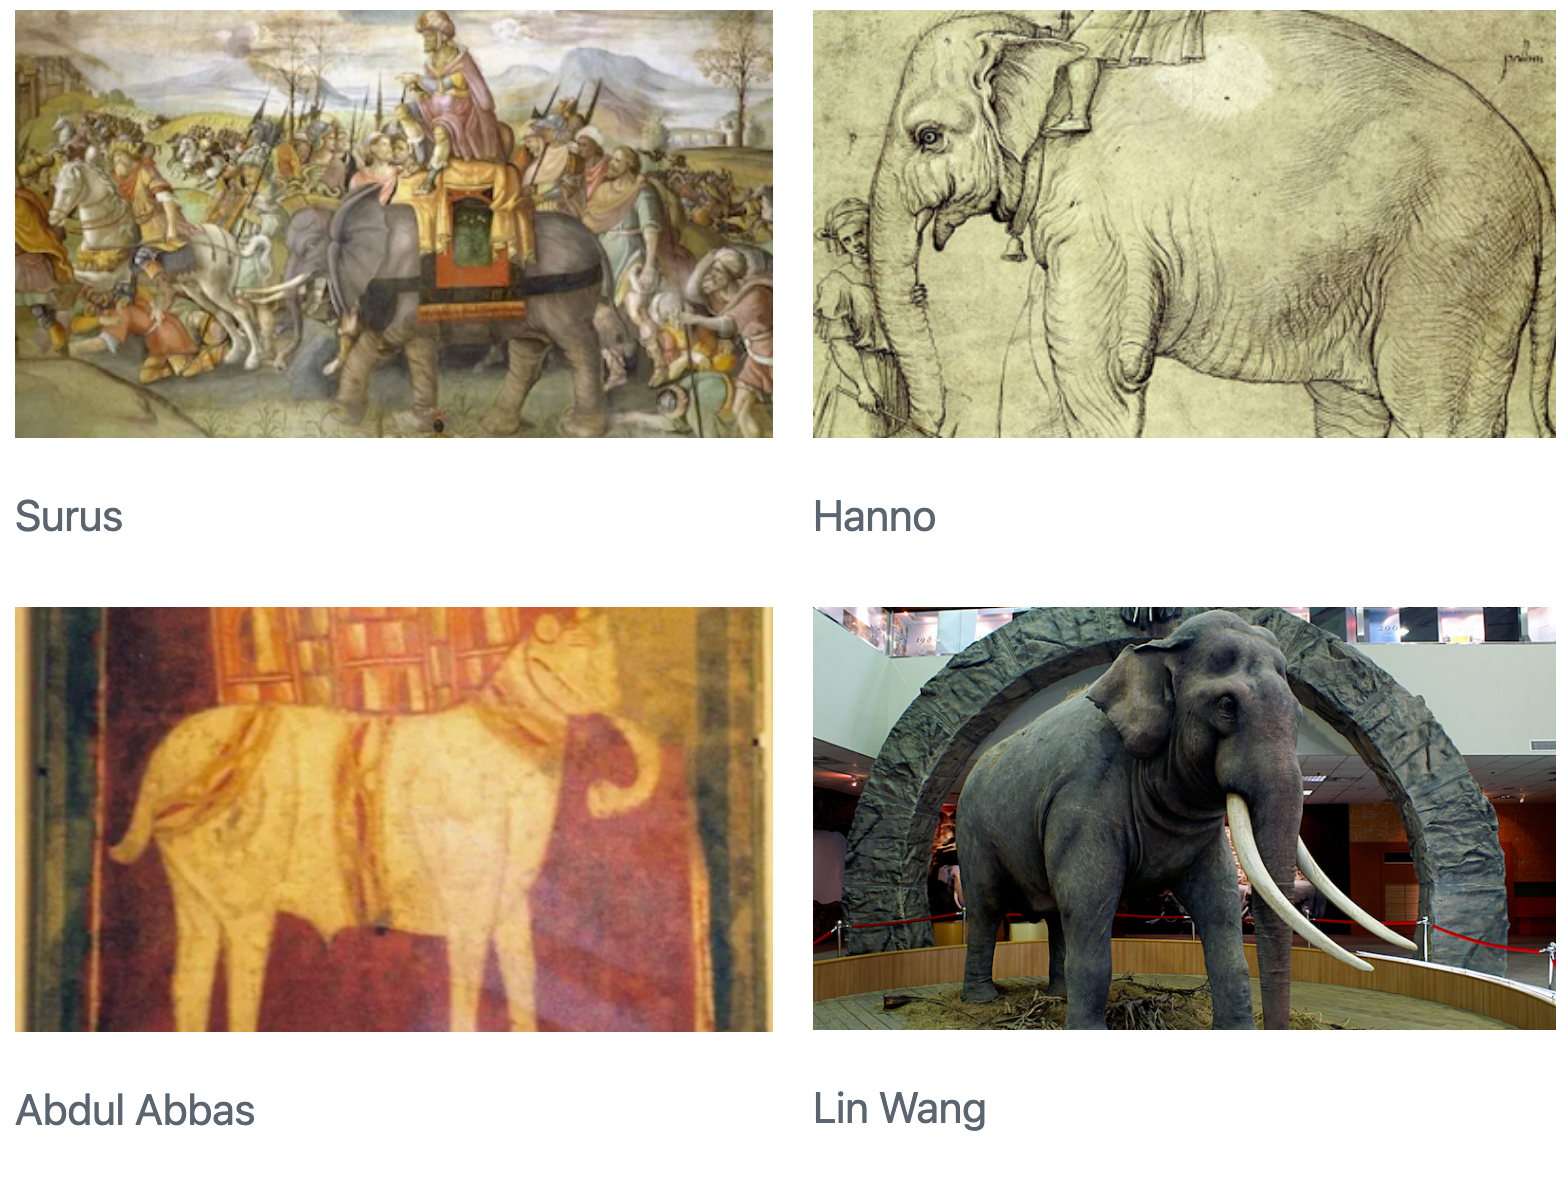 A 2x2 grid of pictures of elephants: Surus, Hanno, Lin Wang, and Abdul Abbas.